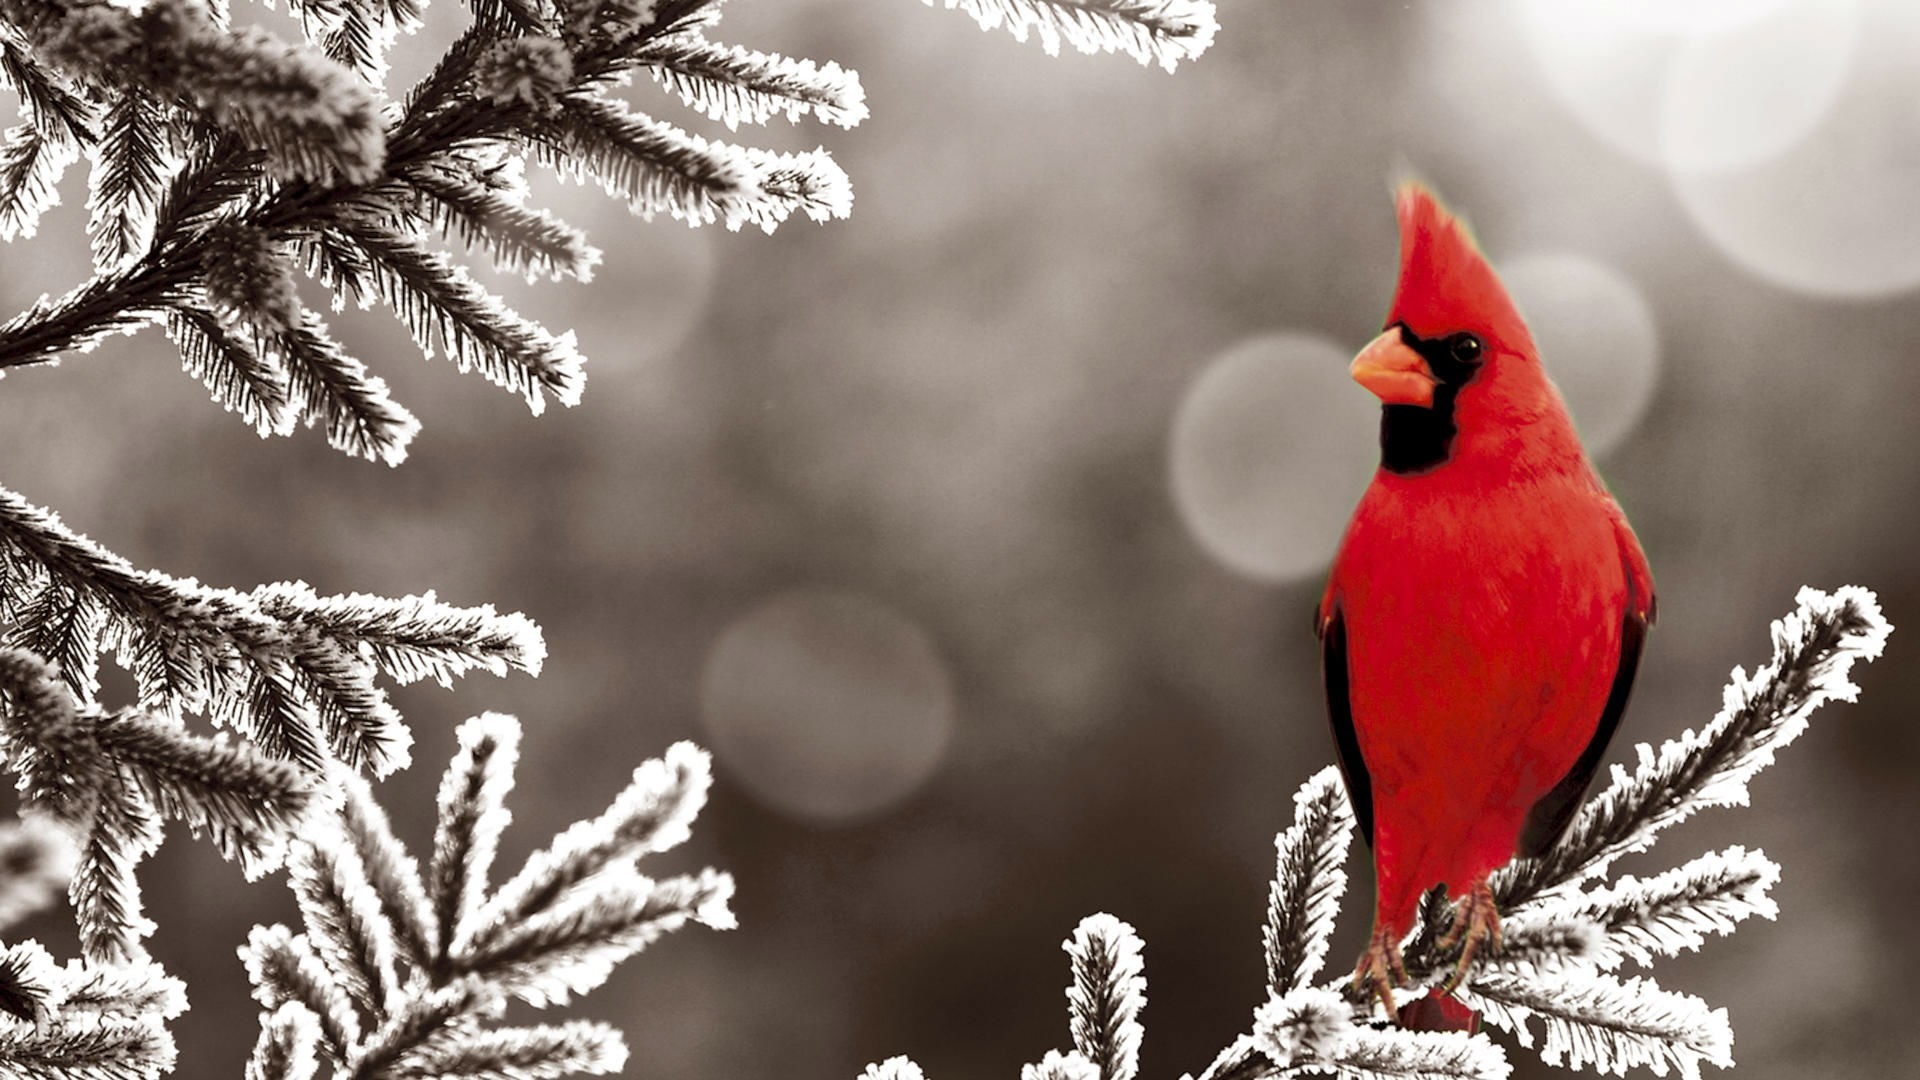 General 1920x1080 animals birds snow cardinals frost cold ice plants winter